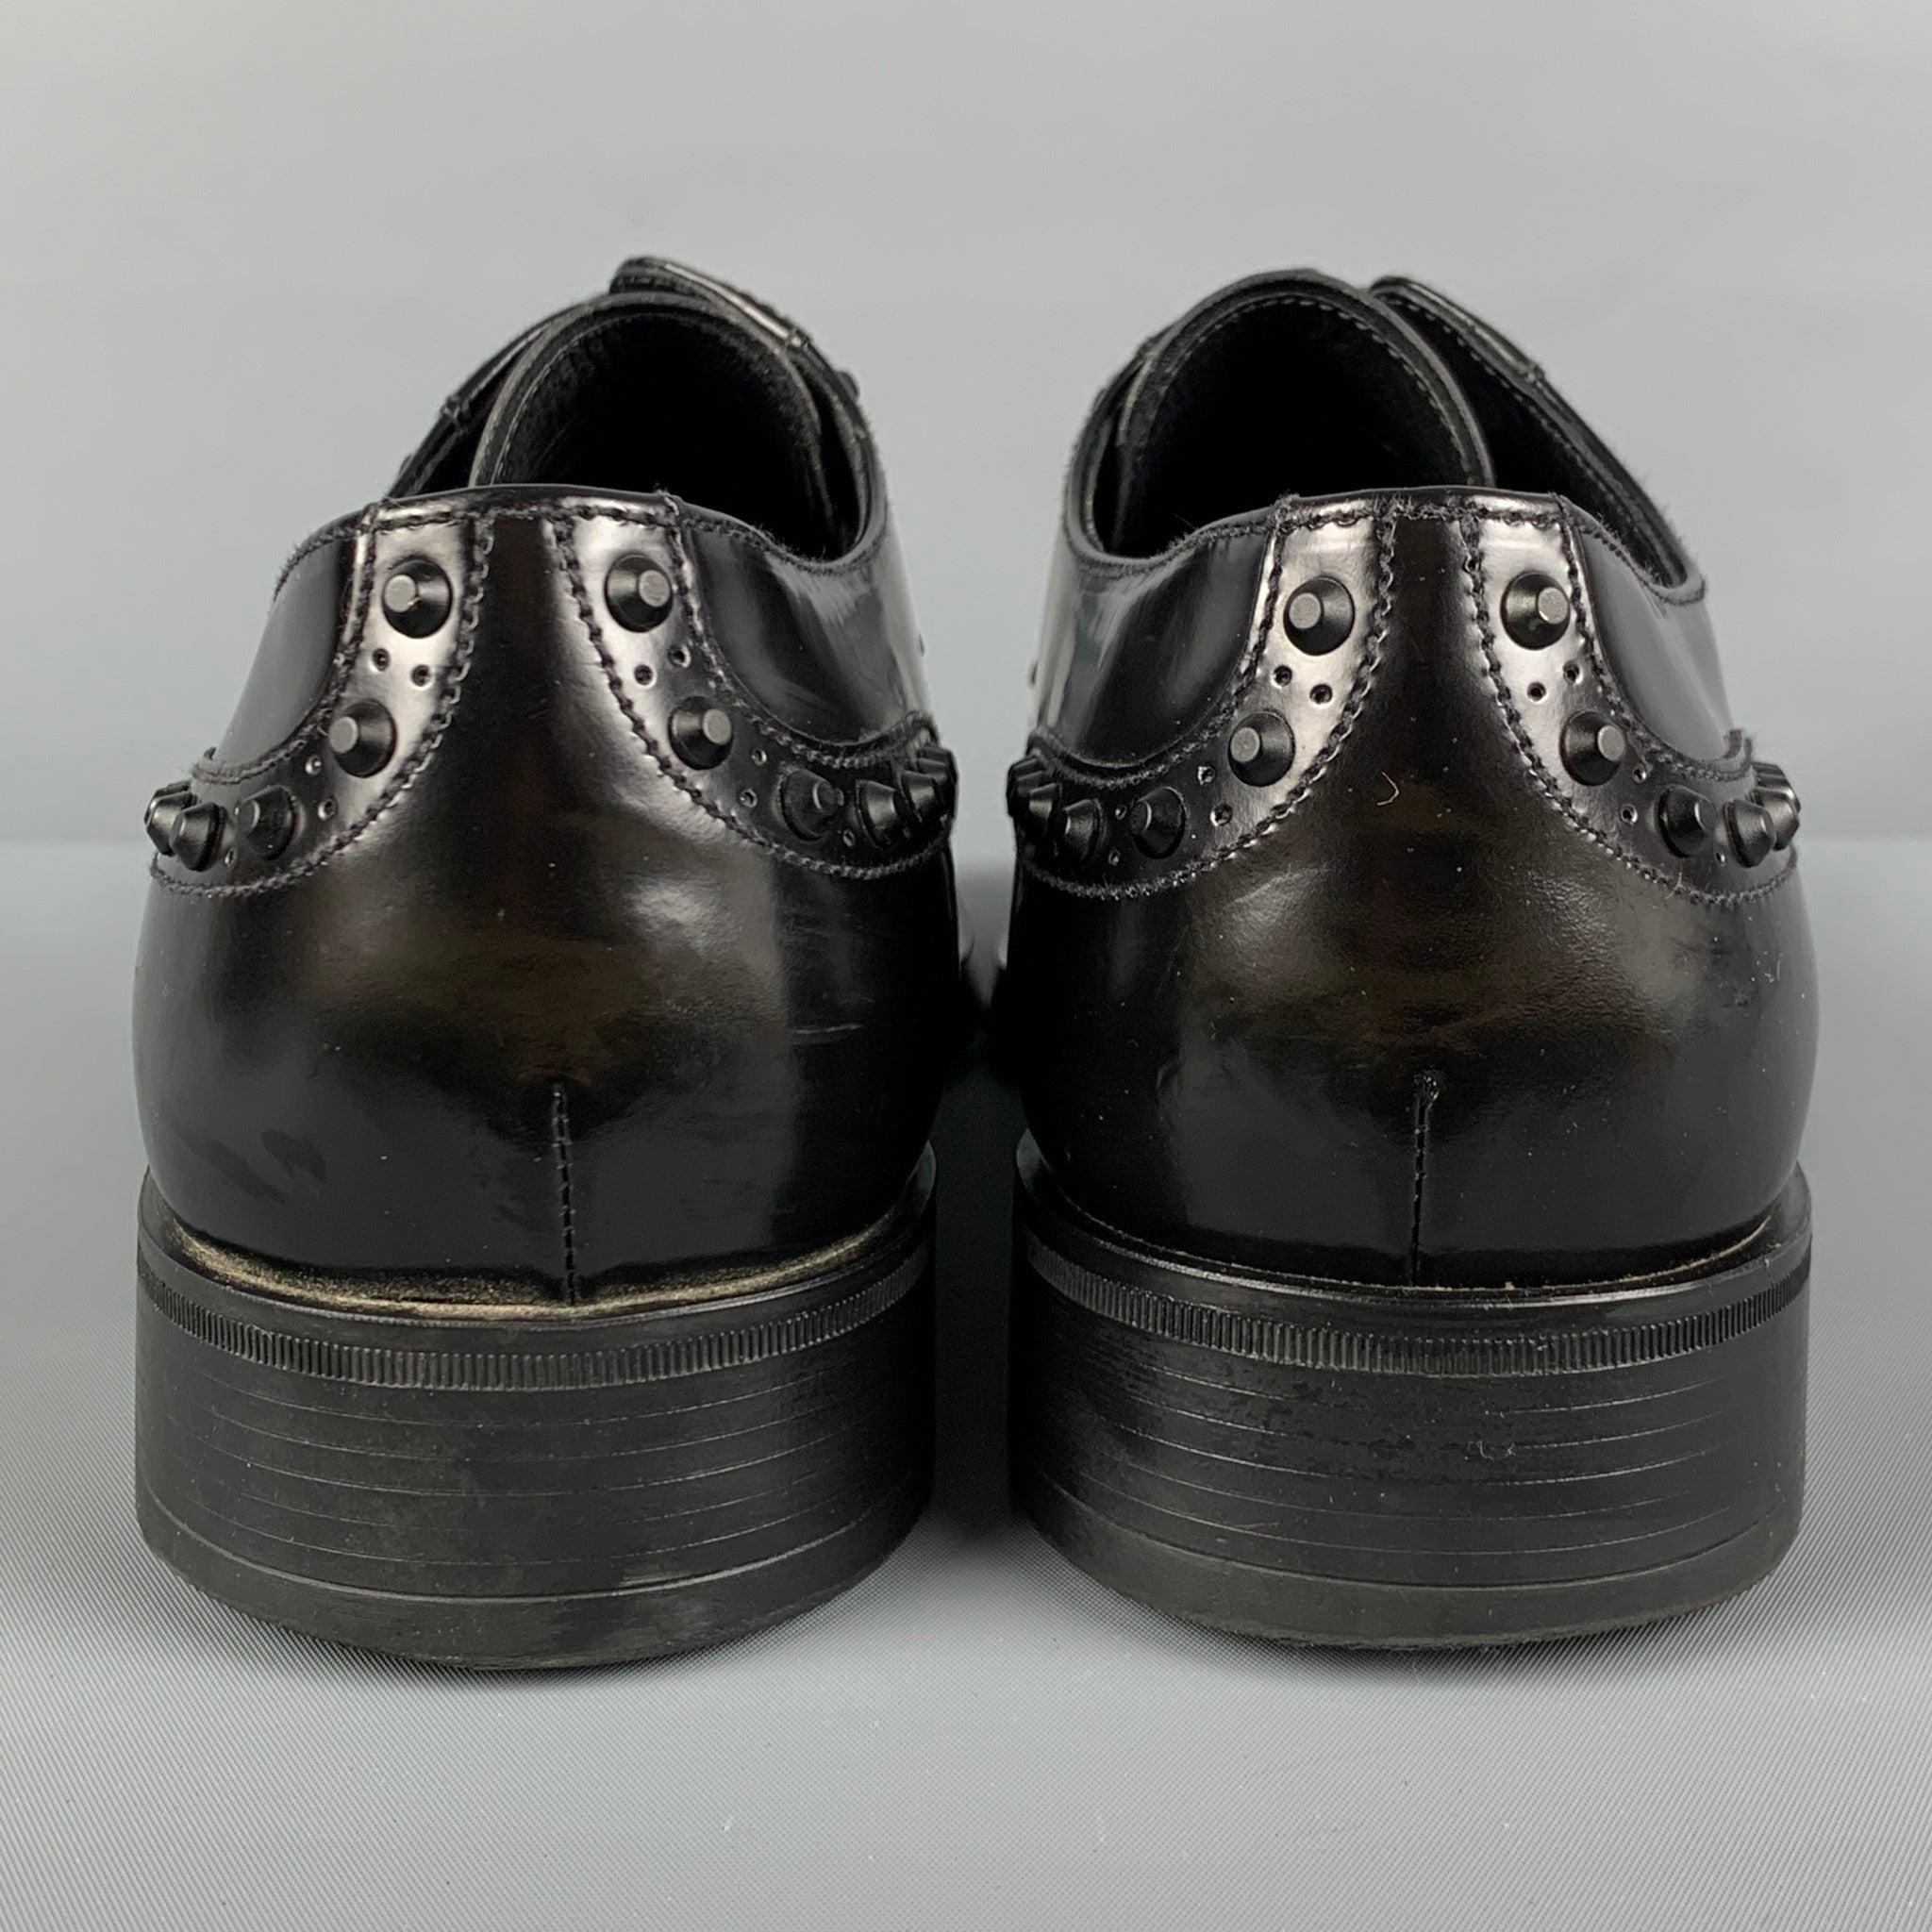 PRADA Size 10.5 Black Studded Leather Lace Up Shoes For Sale 1